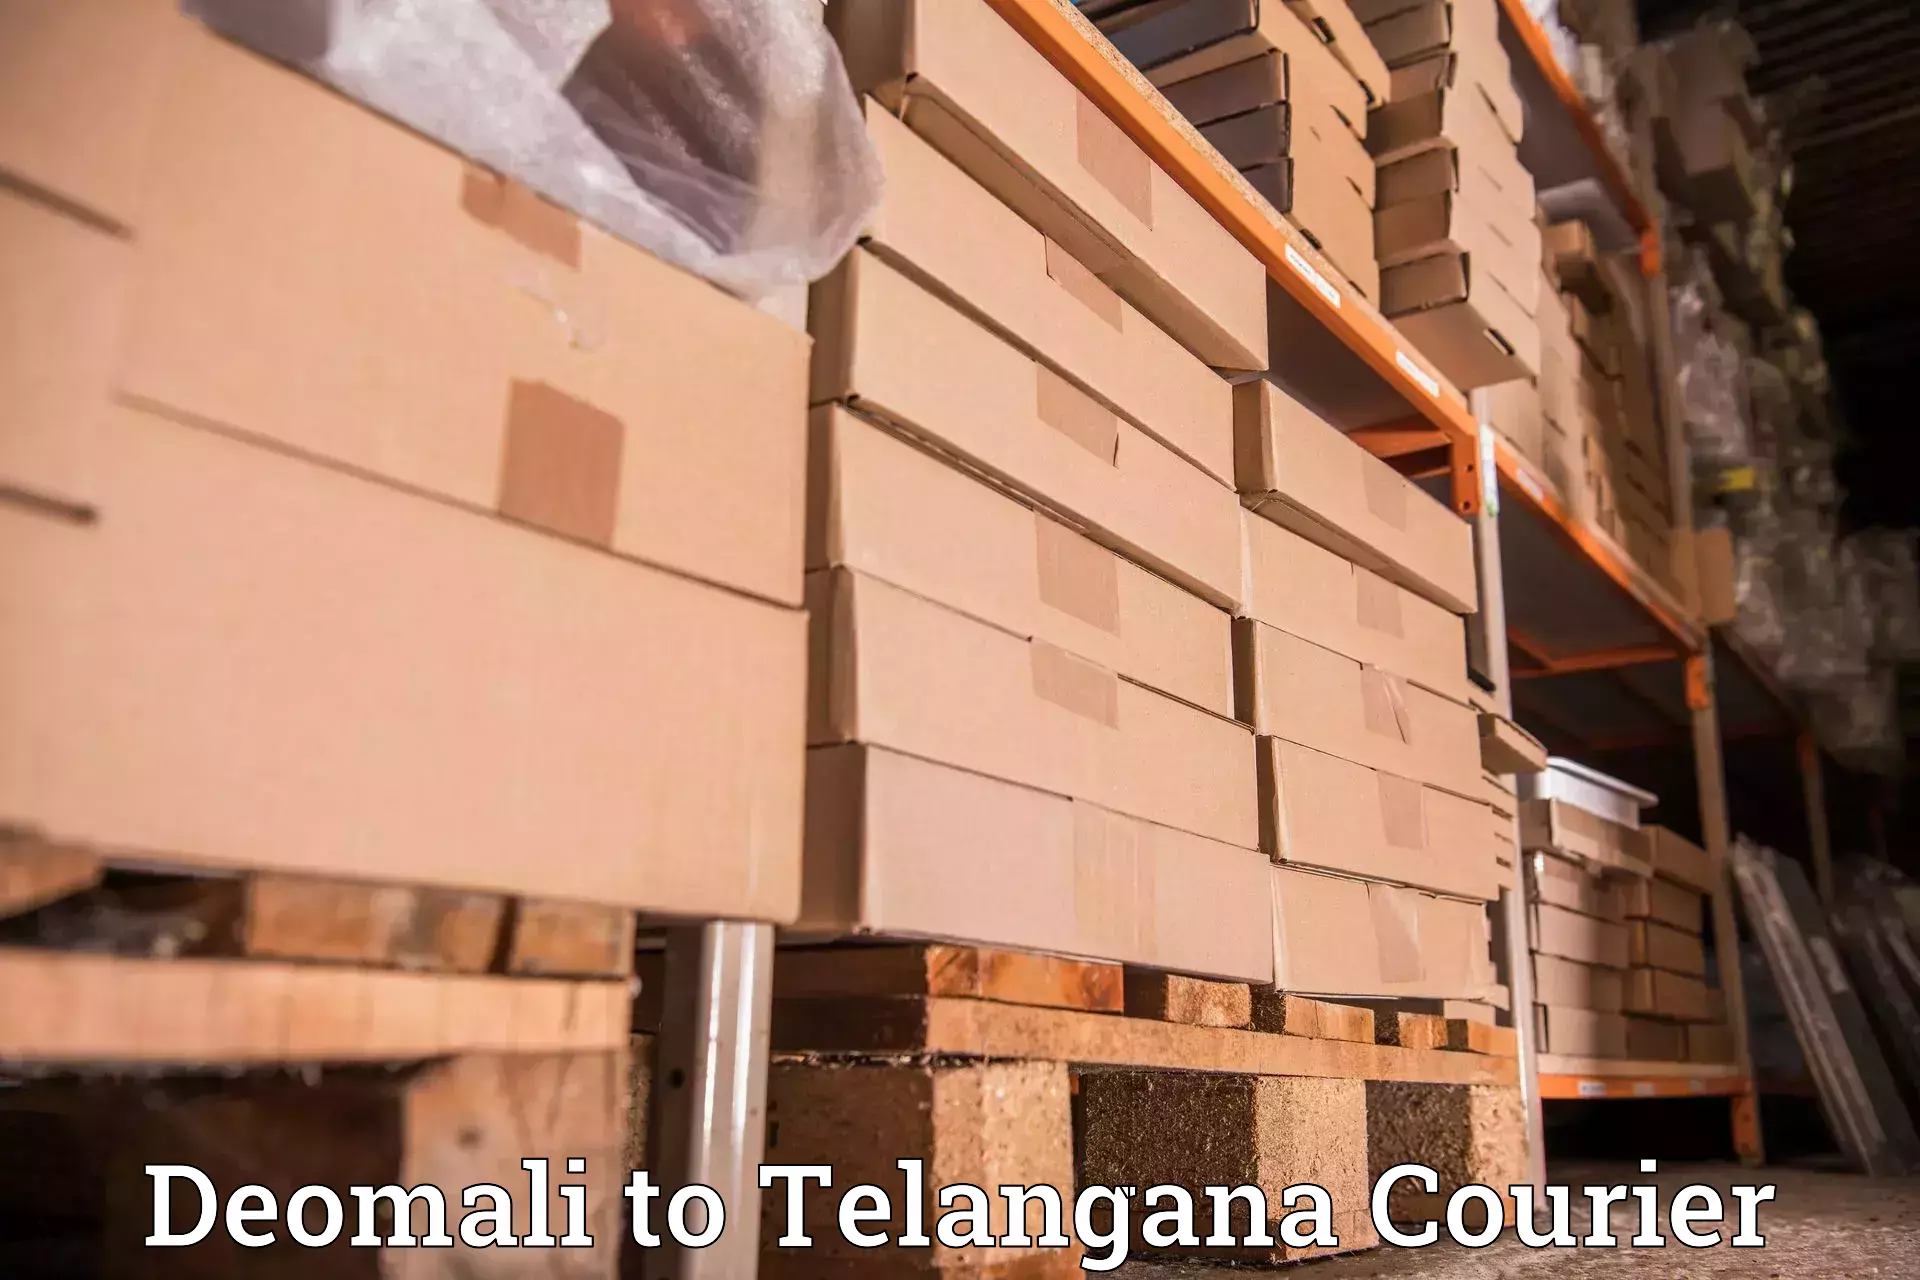 Next-day delivery options Deomali to Telangana